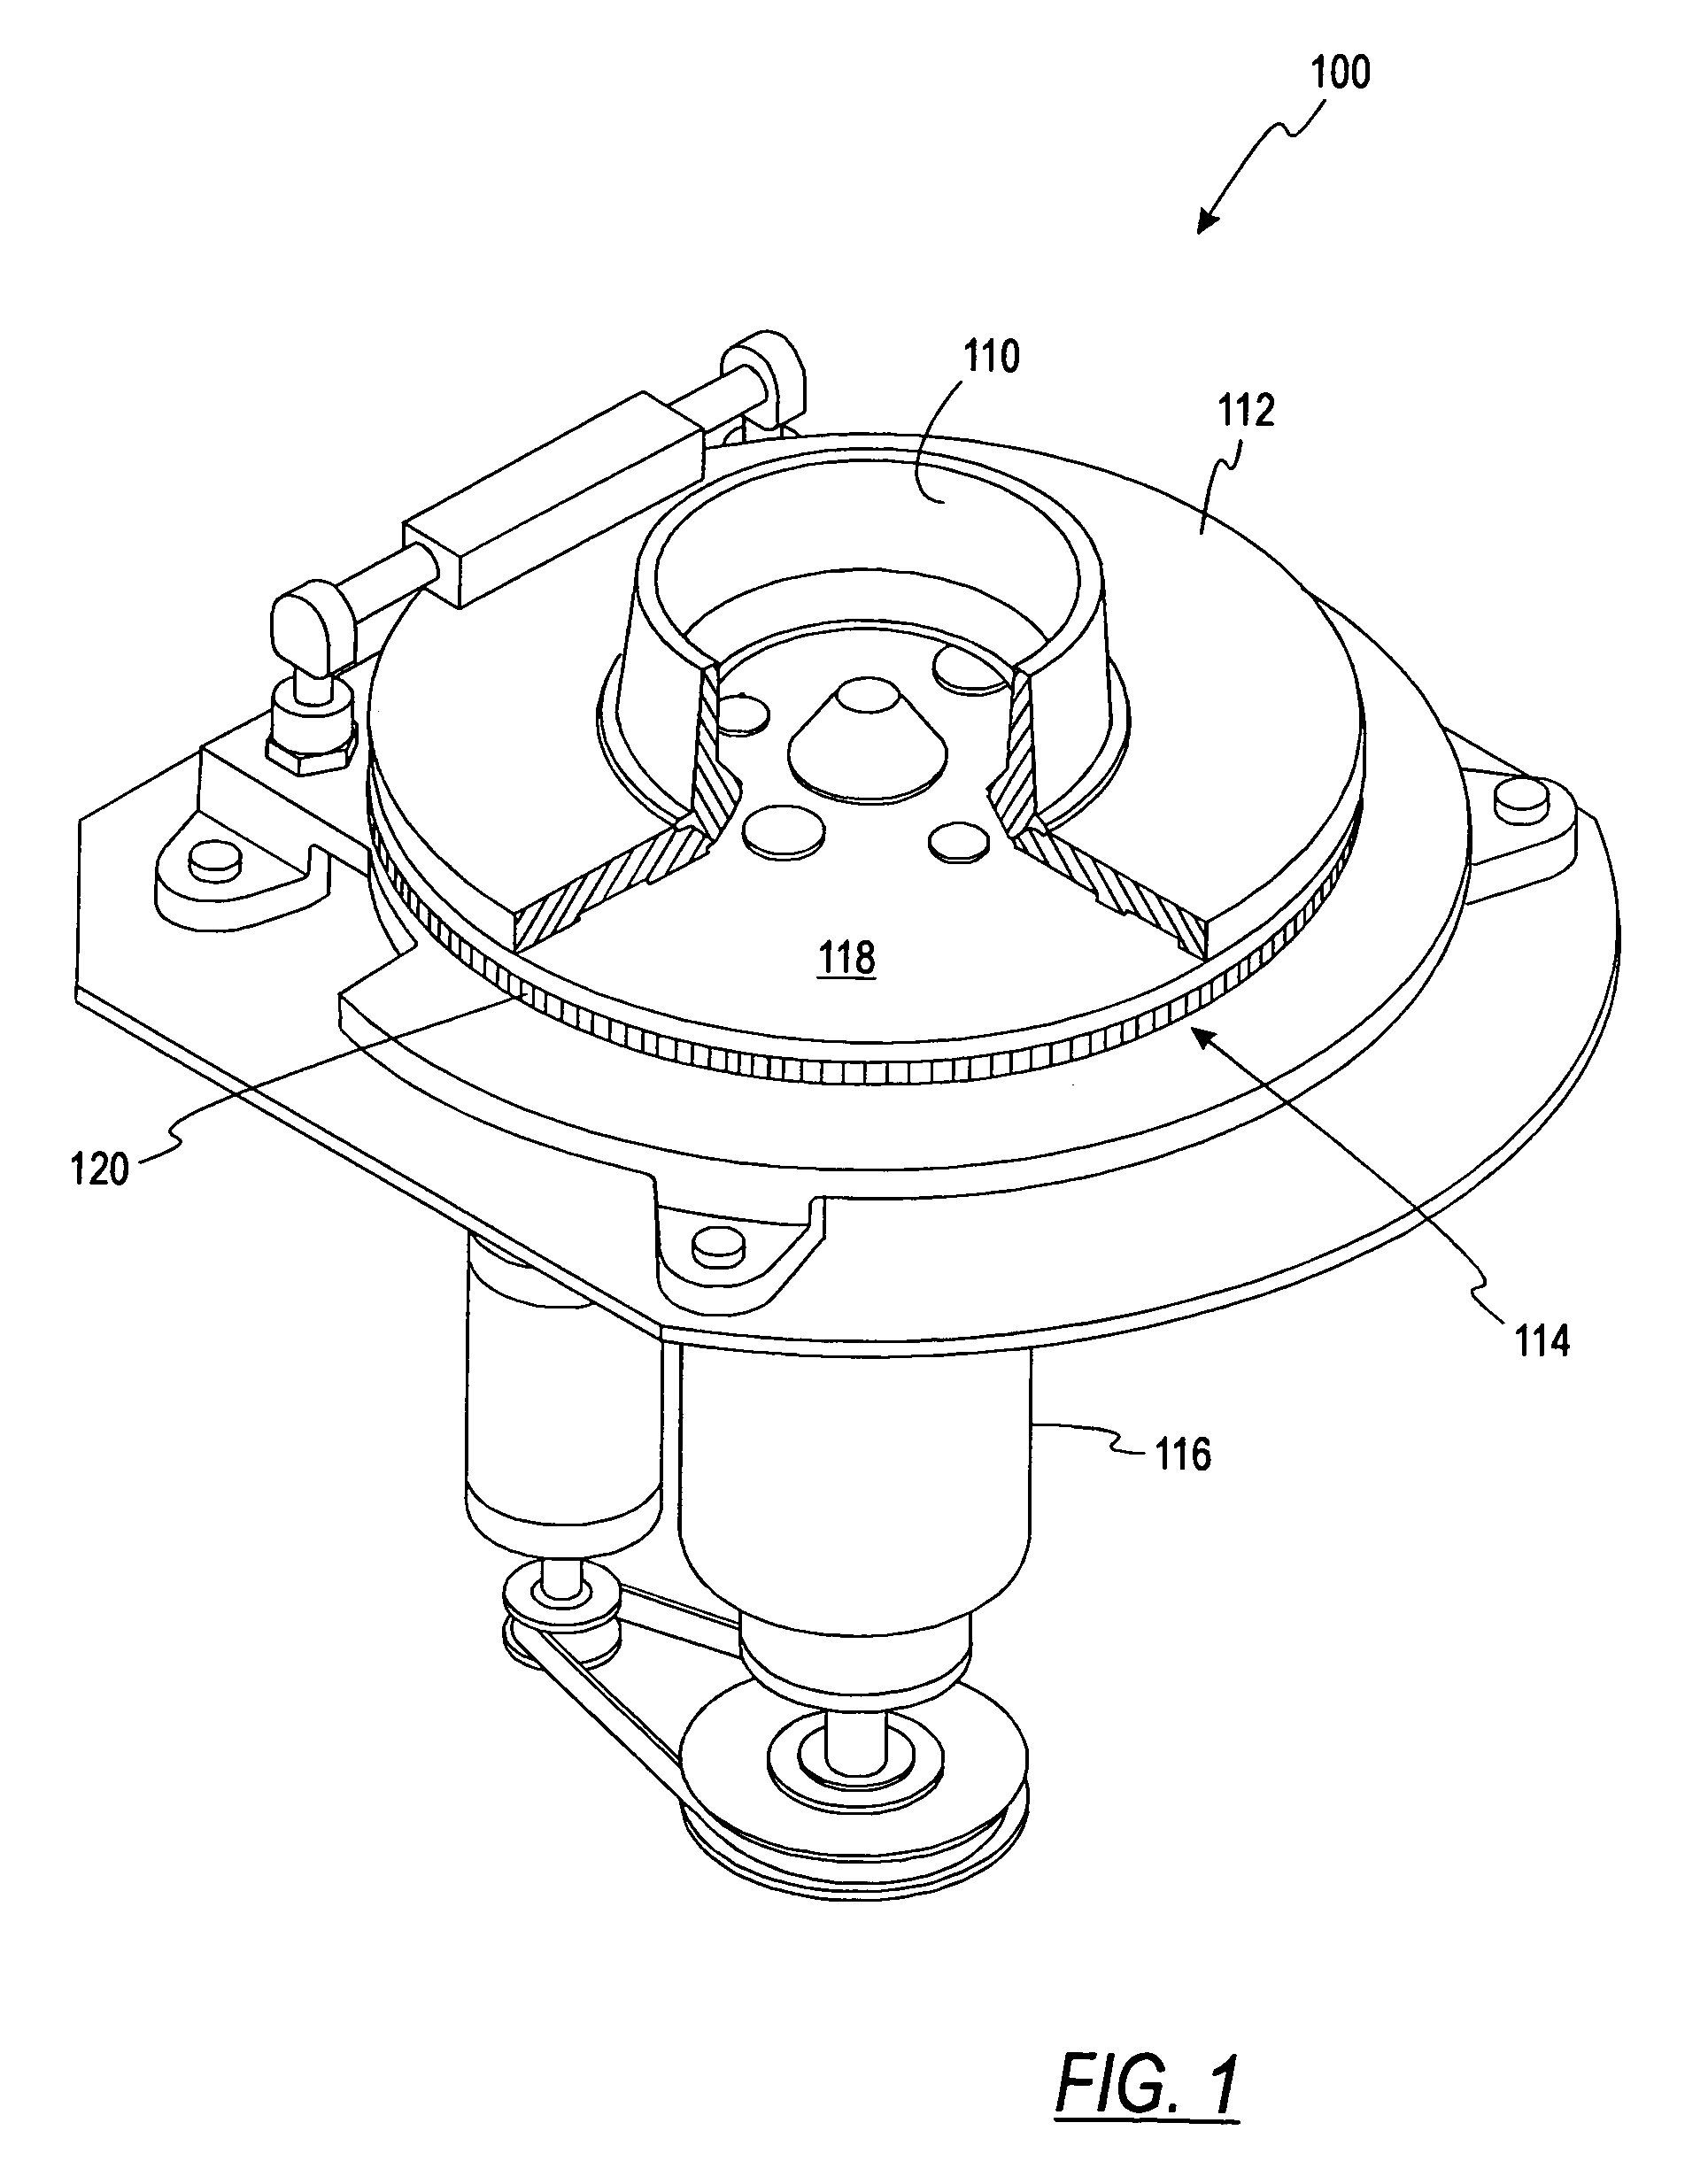 Disc-type coin processing device having improved coin discrimination system